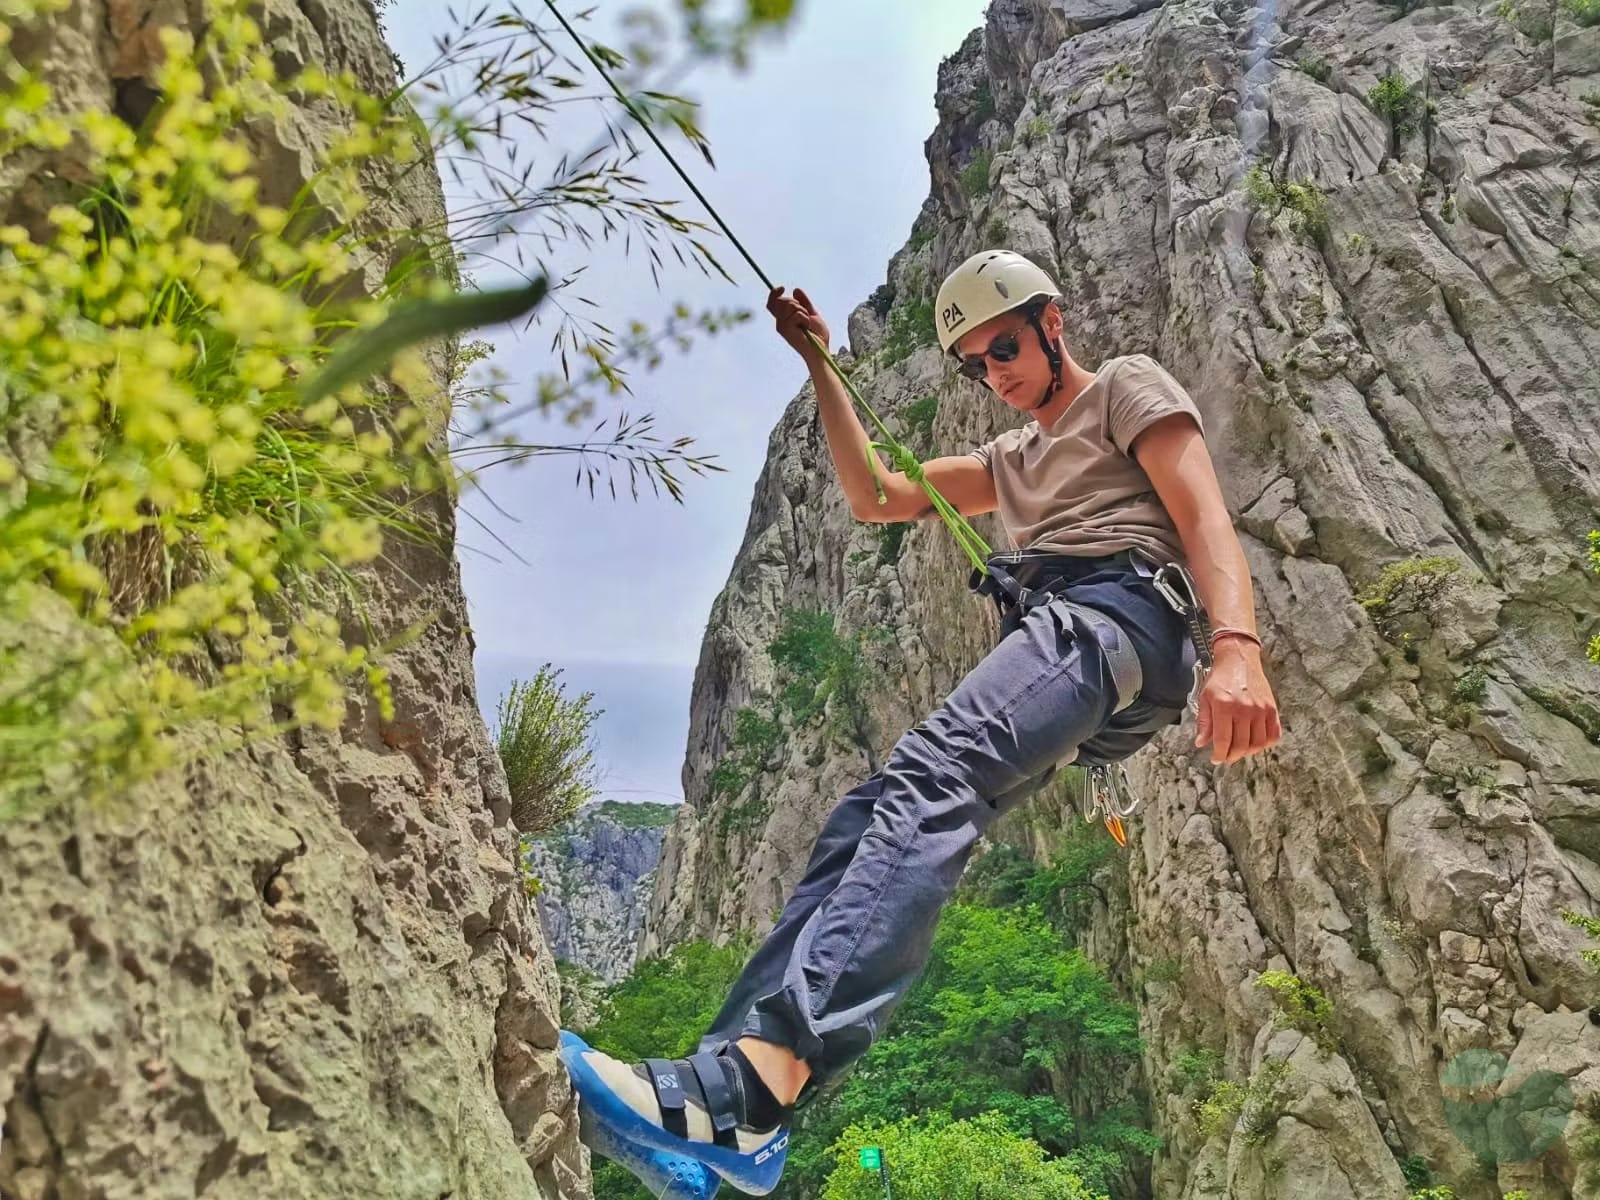 Rock climber hanging on the rope in Paklenica National Park, Starigrad Paklenica, Croatia